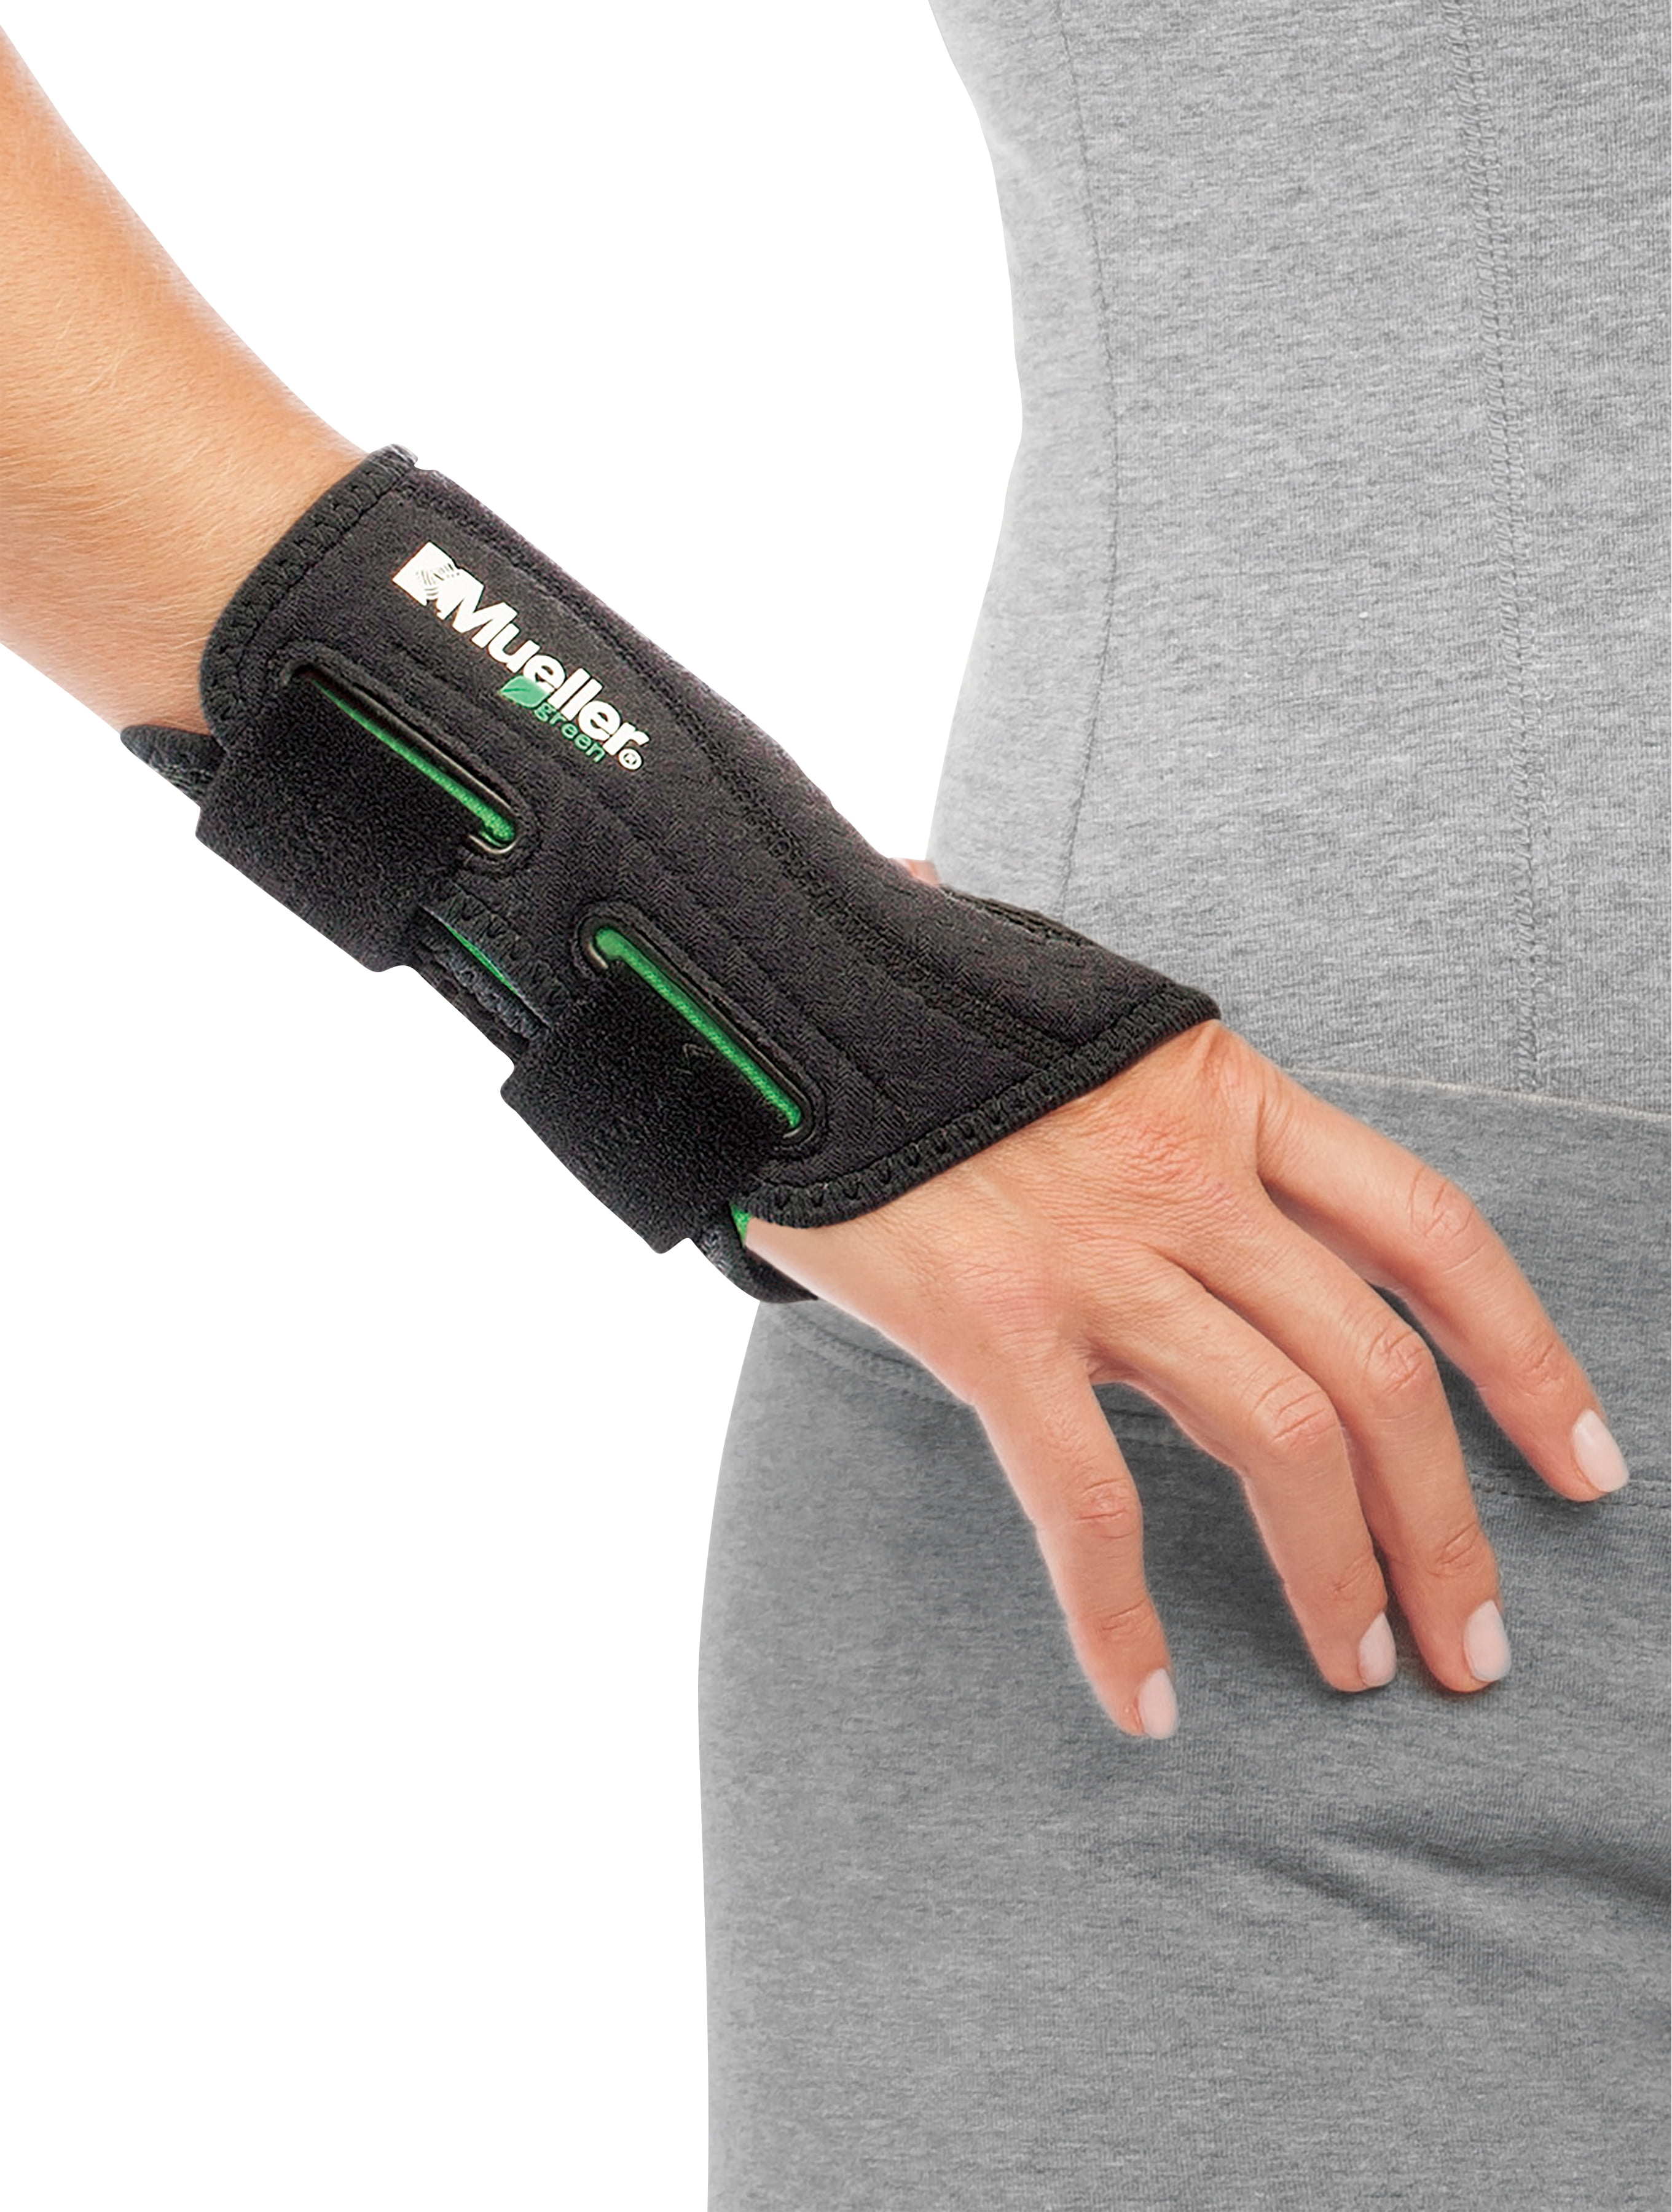 Mueller Green Fitted Wrist Brace, Black, One Size Fits Most, Right Hand 